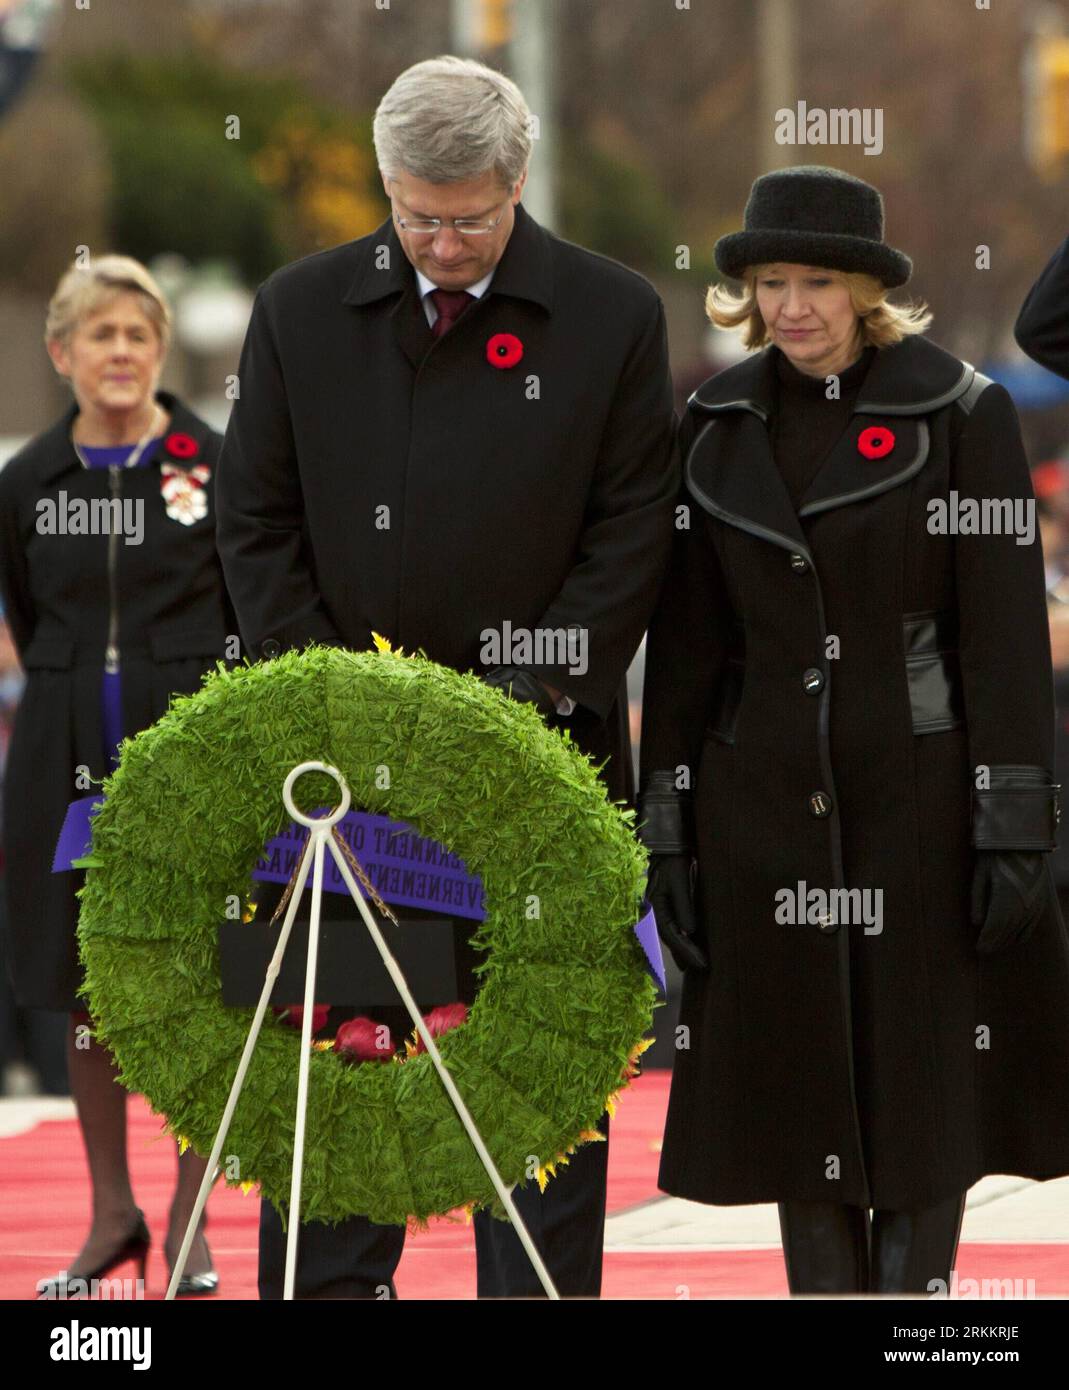 Bildnummer: 56273153  Datum: 11.11.2011  Copyright: imago/Xinhua (111112) -- OTTAWA, Nov. 12, 2011 (Xinhua) -- Canada s Prime Minister Stephen Harper (L Front) and his wife Laureen Harper mourn during the Remembrance Day ceremony at the National War Memorial in Ottawa, Canada, on Nov. 11, 2011. The Remembrance Day is a memorial day observed in the Commonwealth countries to remember the sacrifice of the members of the armed forces and civilians in times of war, specifically since World War I. This day is observed on Nov. 11 to recall the official end of World War I at 11 a.m. on Nov. 11, 1918, Stock Photo